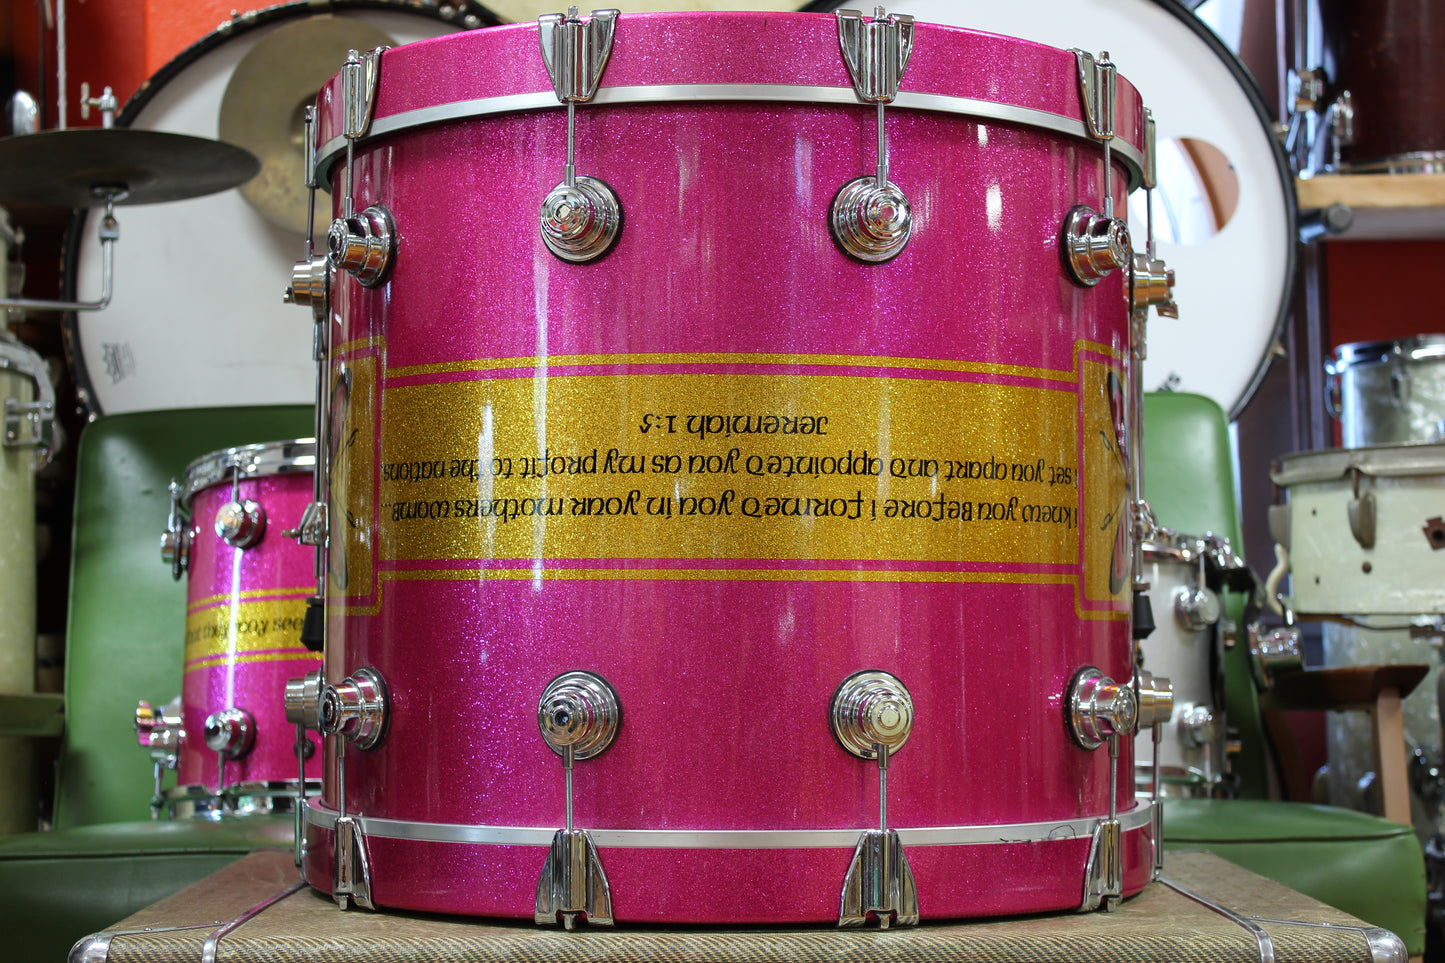 2000s DW Collectors Exotic VLX in Pink Glitter / Bible Verse